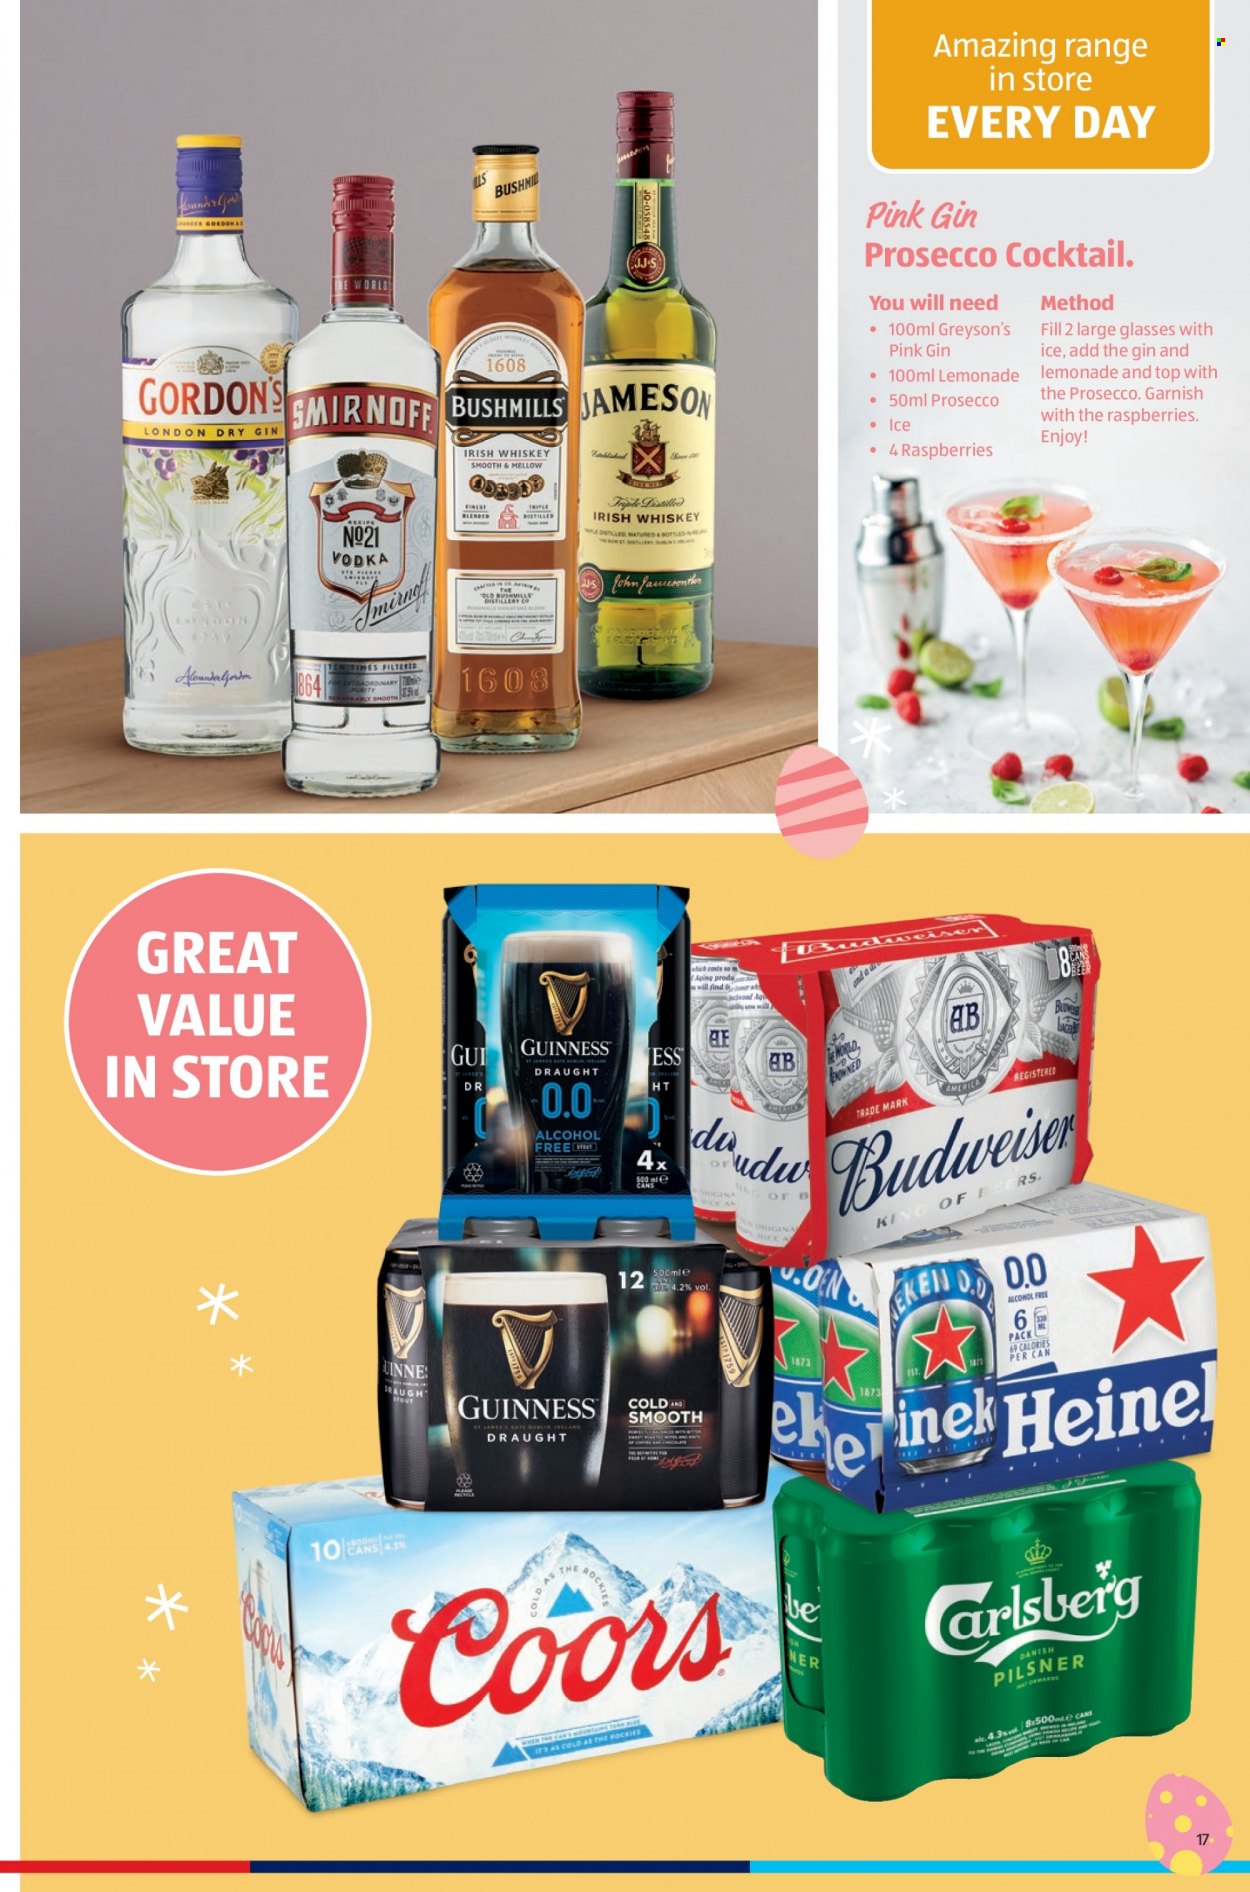 thumbnail - Aldi offer  - Sales products - rice, prosecco, gin, Smirnoff, vodka, whiskey, irish whiskey, Jameson, Gordon's, whisky, beer, Carlsberg, Guinness, Purity, Budweiser, Coors. Page 17.